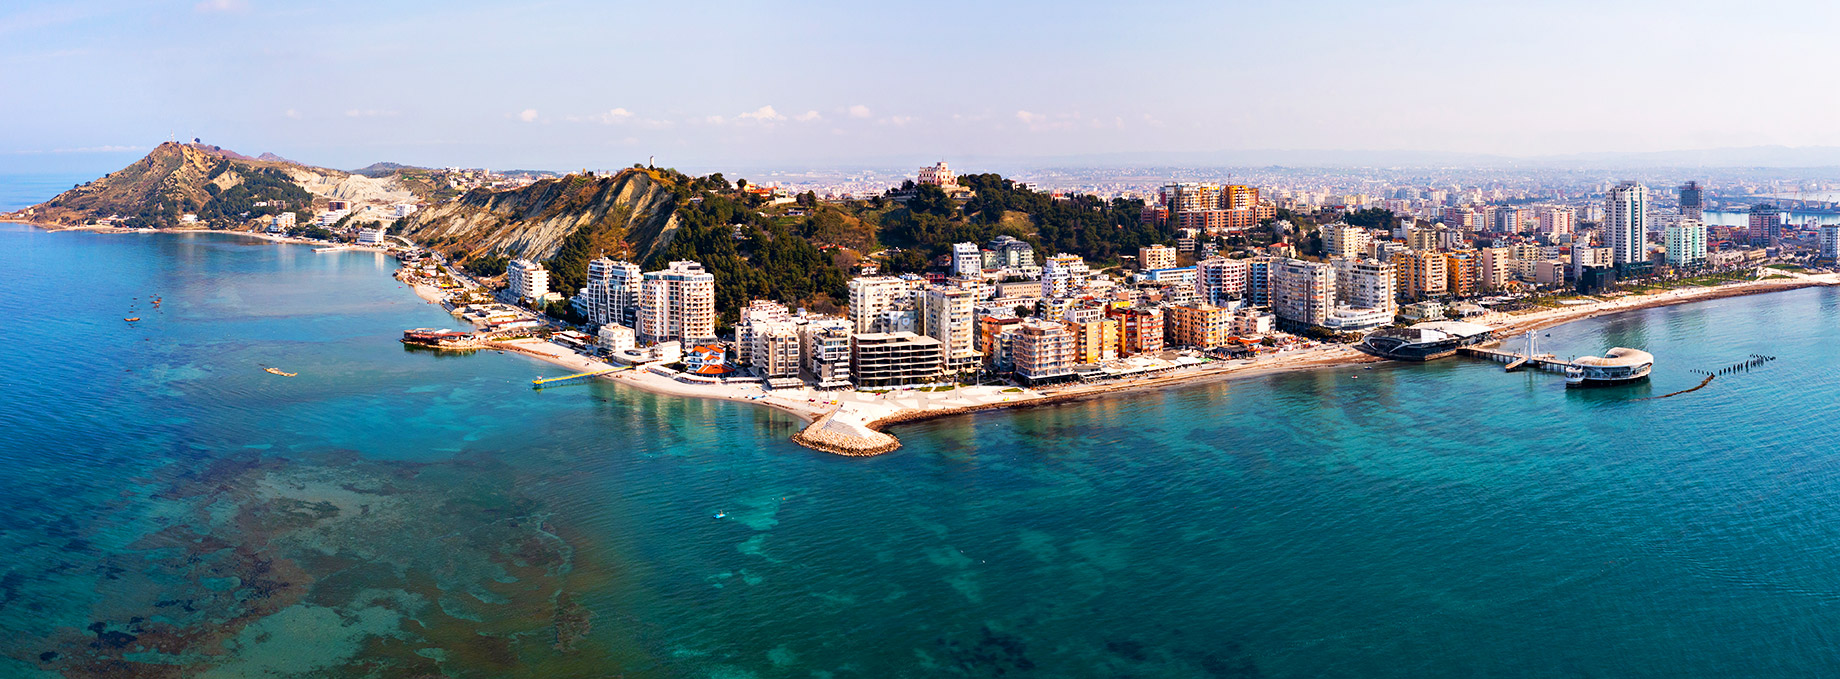 Scenic Panoramic Aerial View Of Durrës Cityscape On Albanian Adriatic Coast